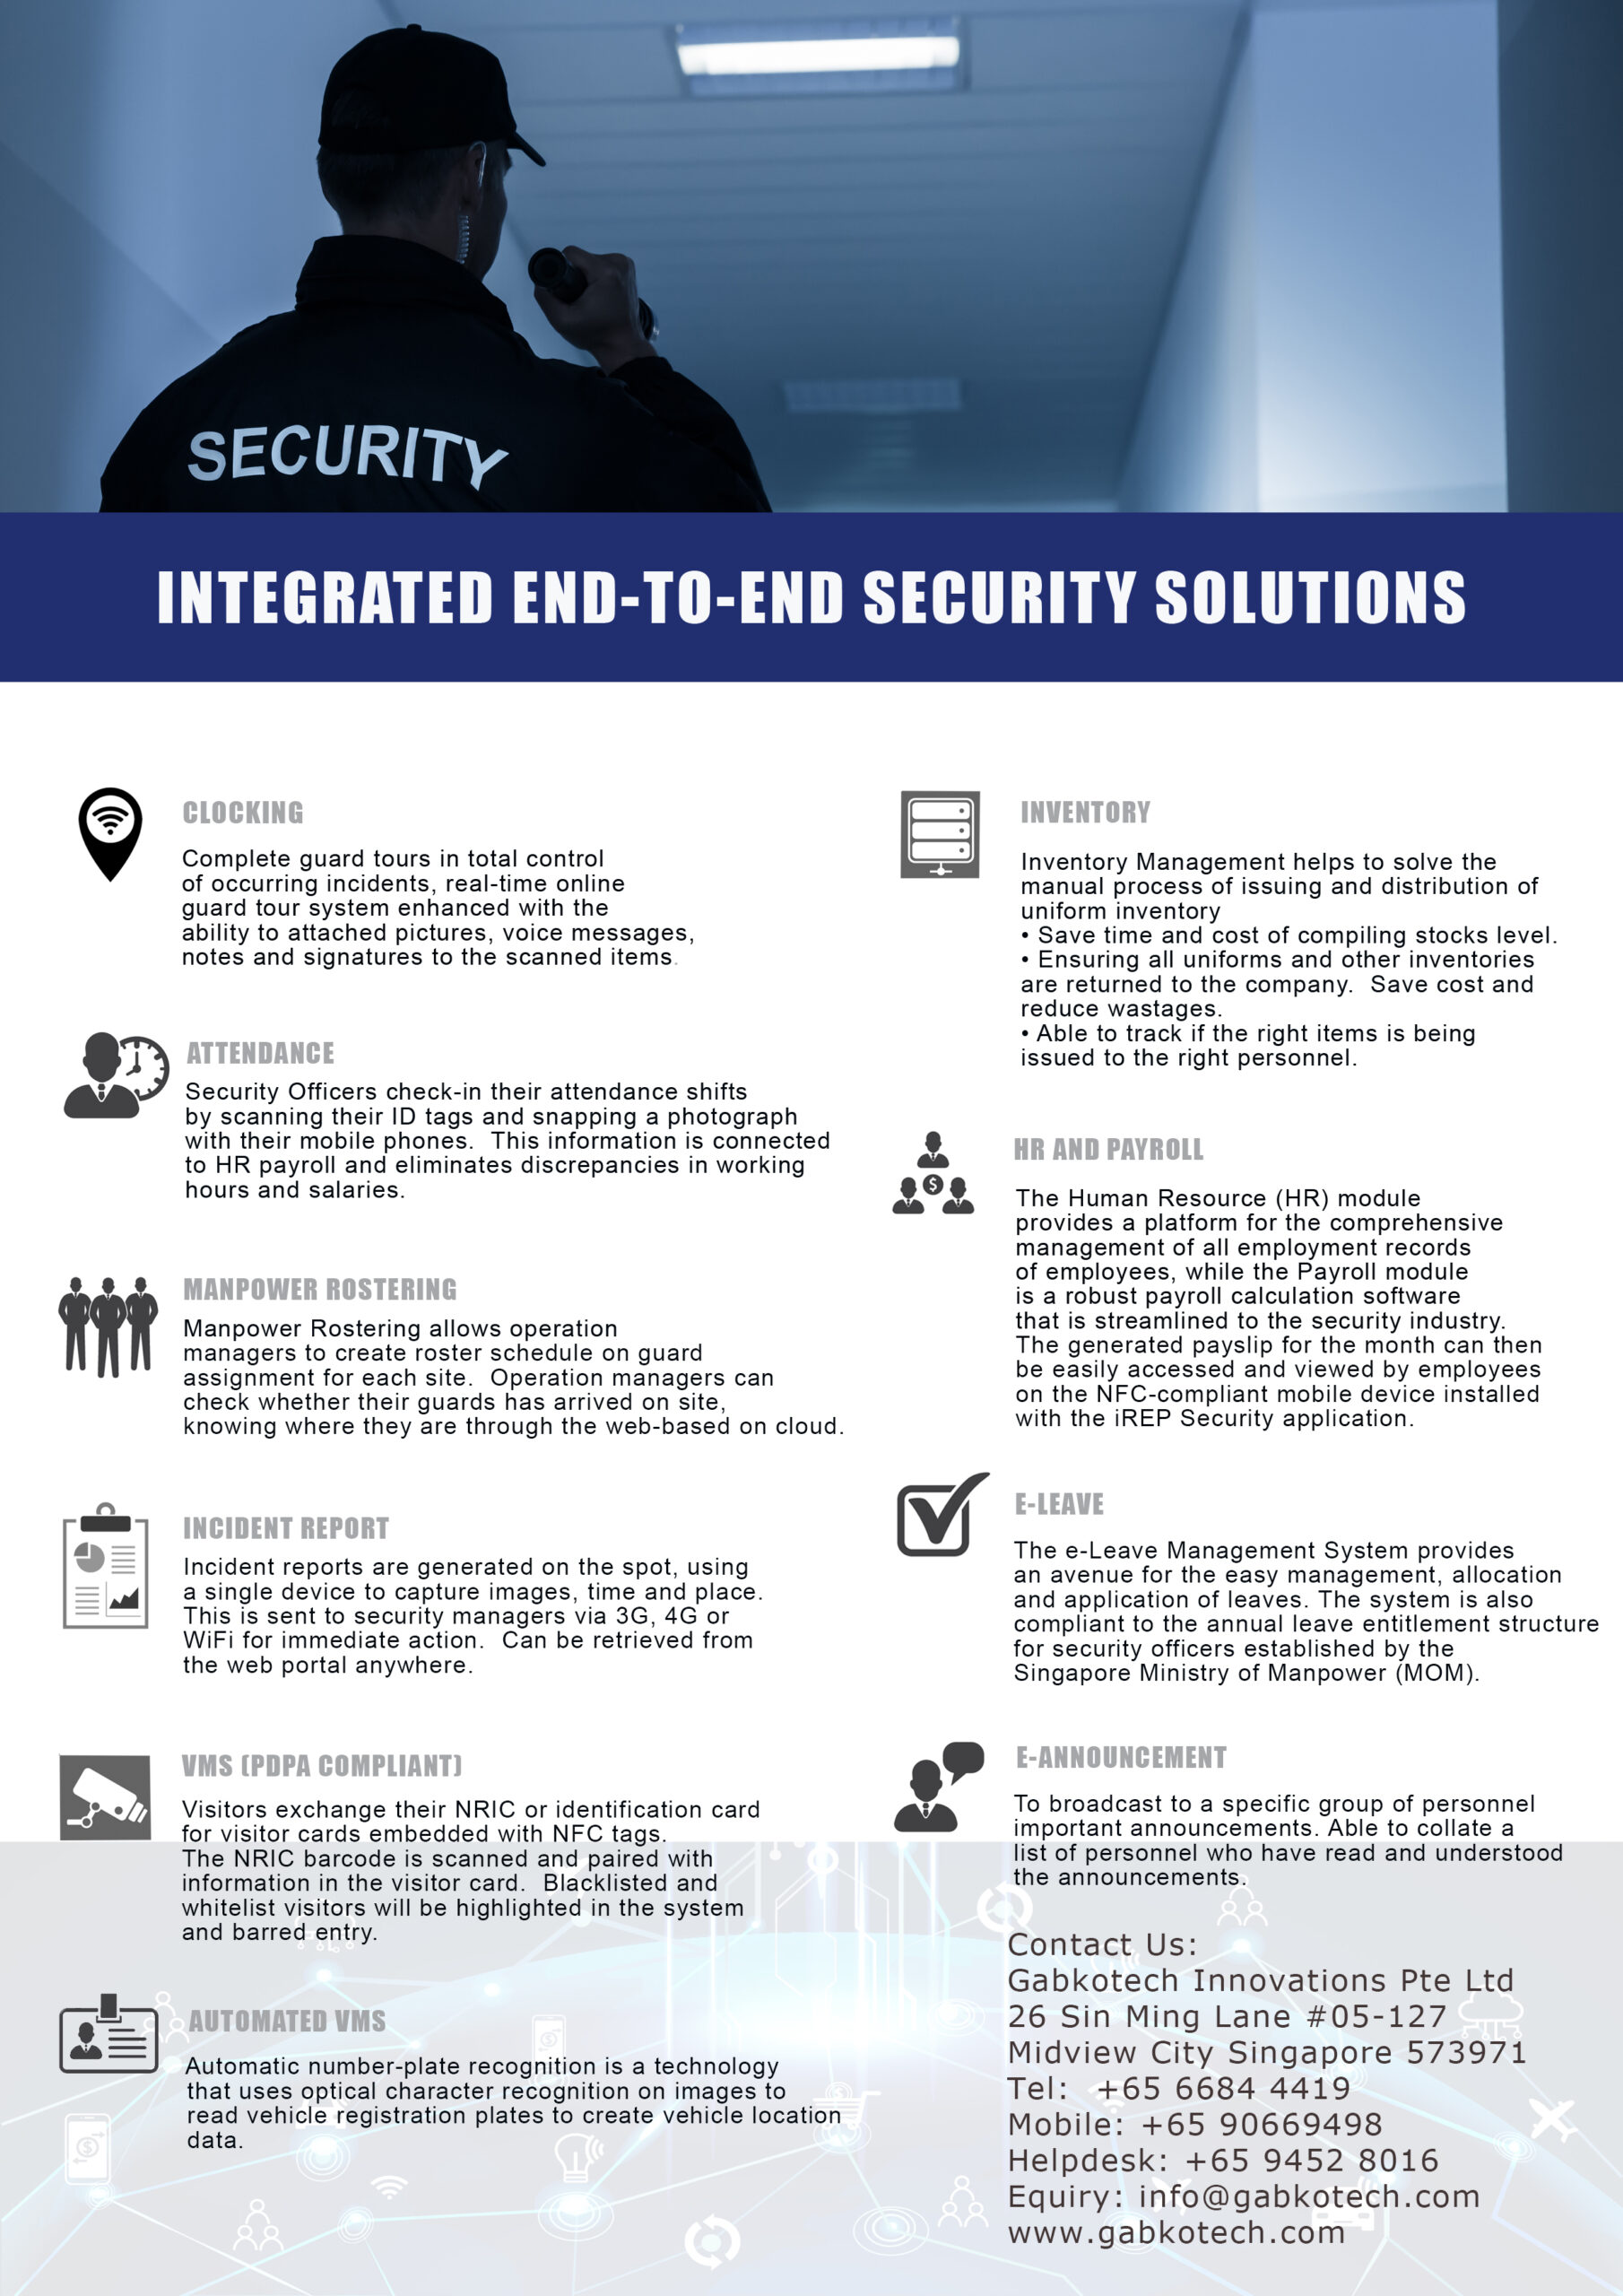 A promotional image for the SSIA 2019 competition, highlighting key dates, eligible participants, evaluation criteria, and the types of awards to be given for innovative security solutions.